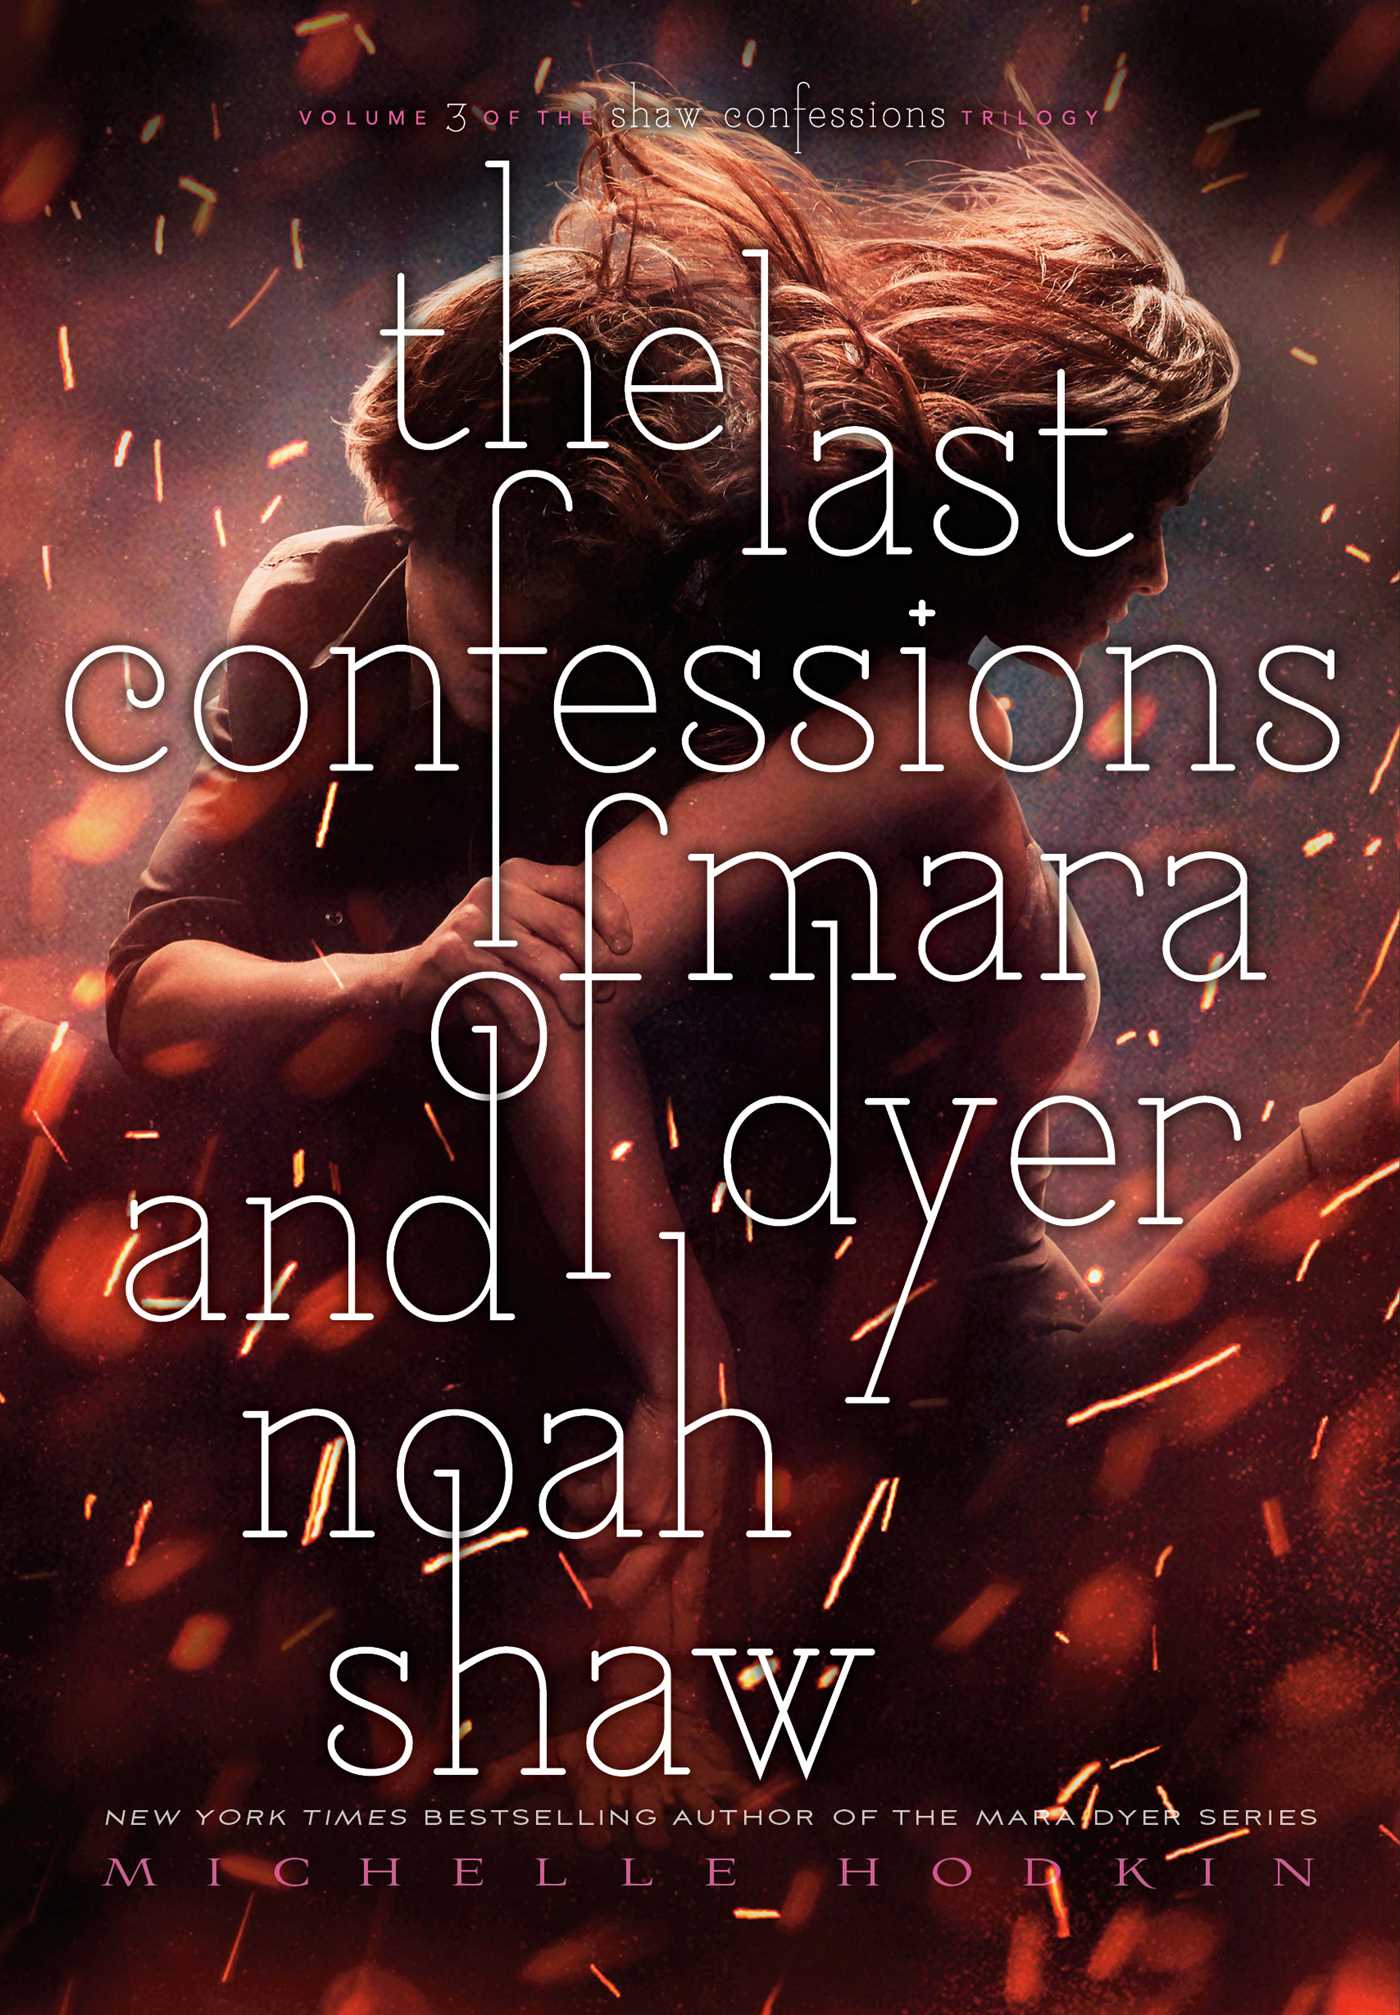 Last Confessions of Mara Dyer and Noah Shaw